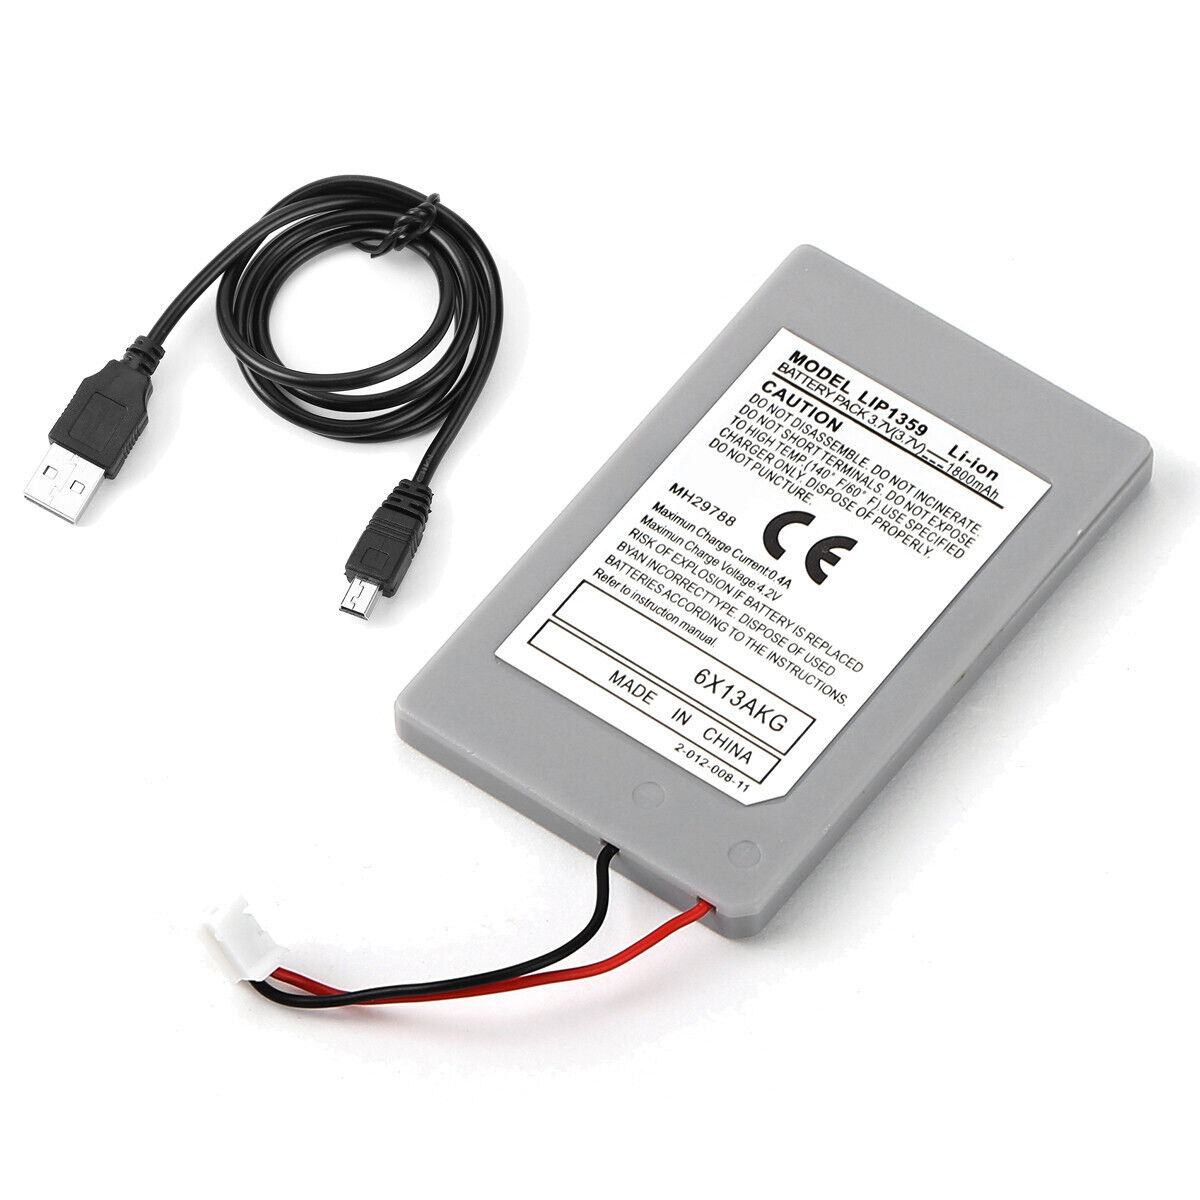 New 1800mAh Rechargeable Battery For Sony Playstation 3 PS3 Wireless Controller Unbranded